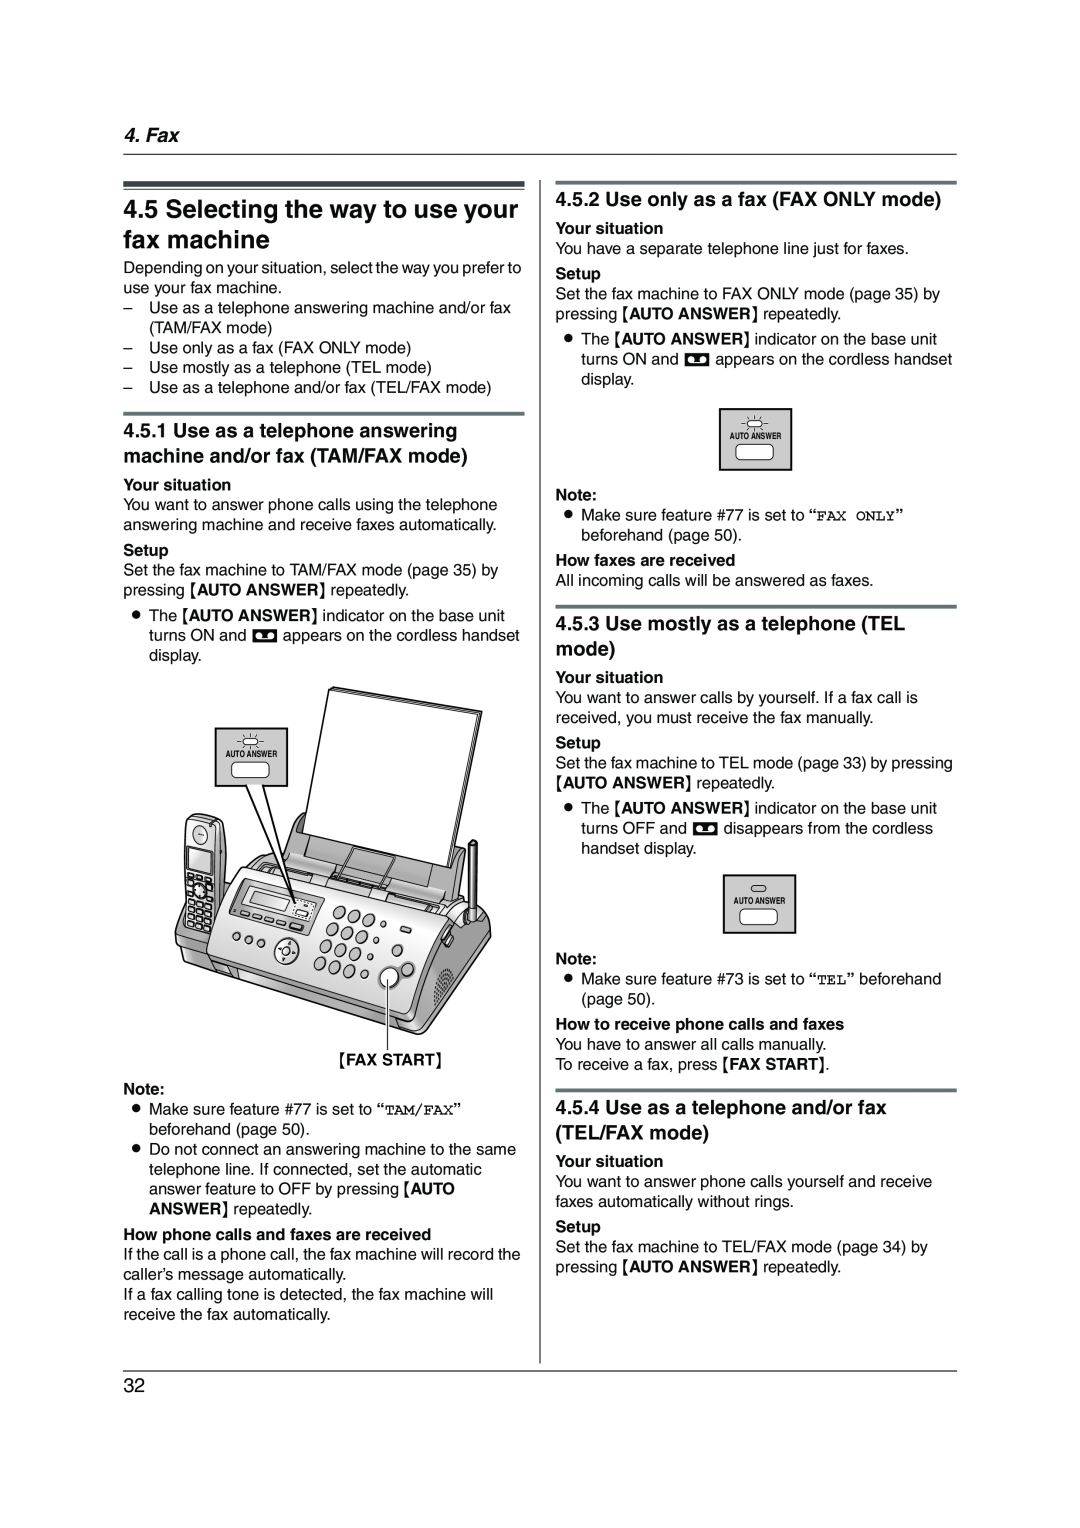 Panasonic KX-FC228HK operating instructions Selecting the way to use your fax machine, Use only as a fax FAX ONLY mode, Fax 